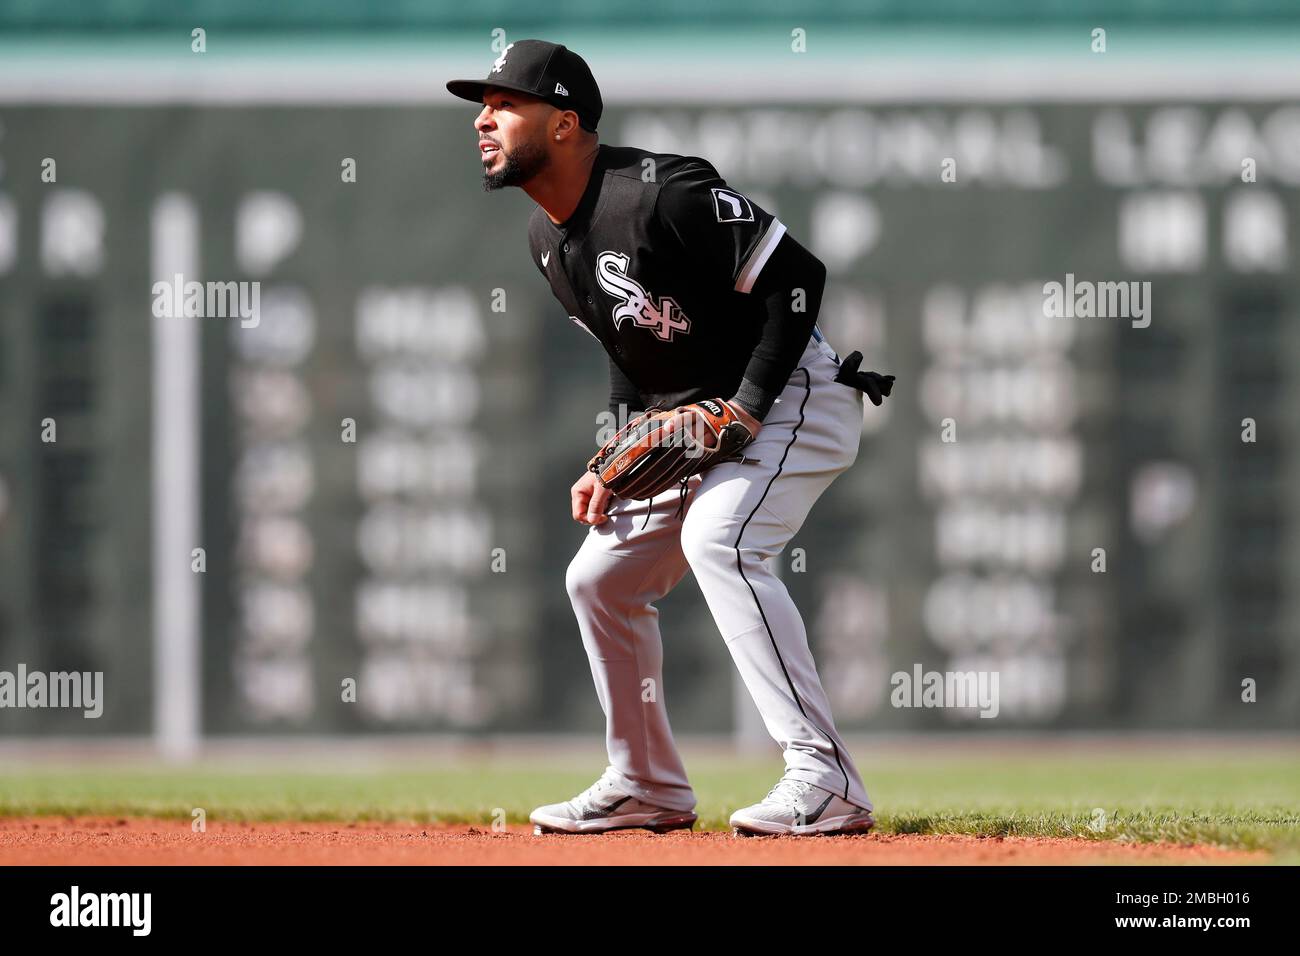 Chicago White Sox's Leury Garcia plays against the Boston Red Sox